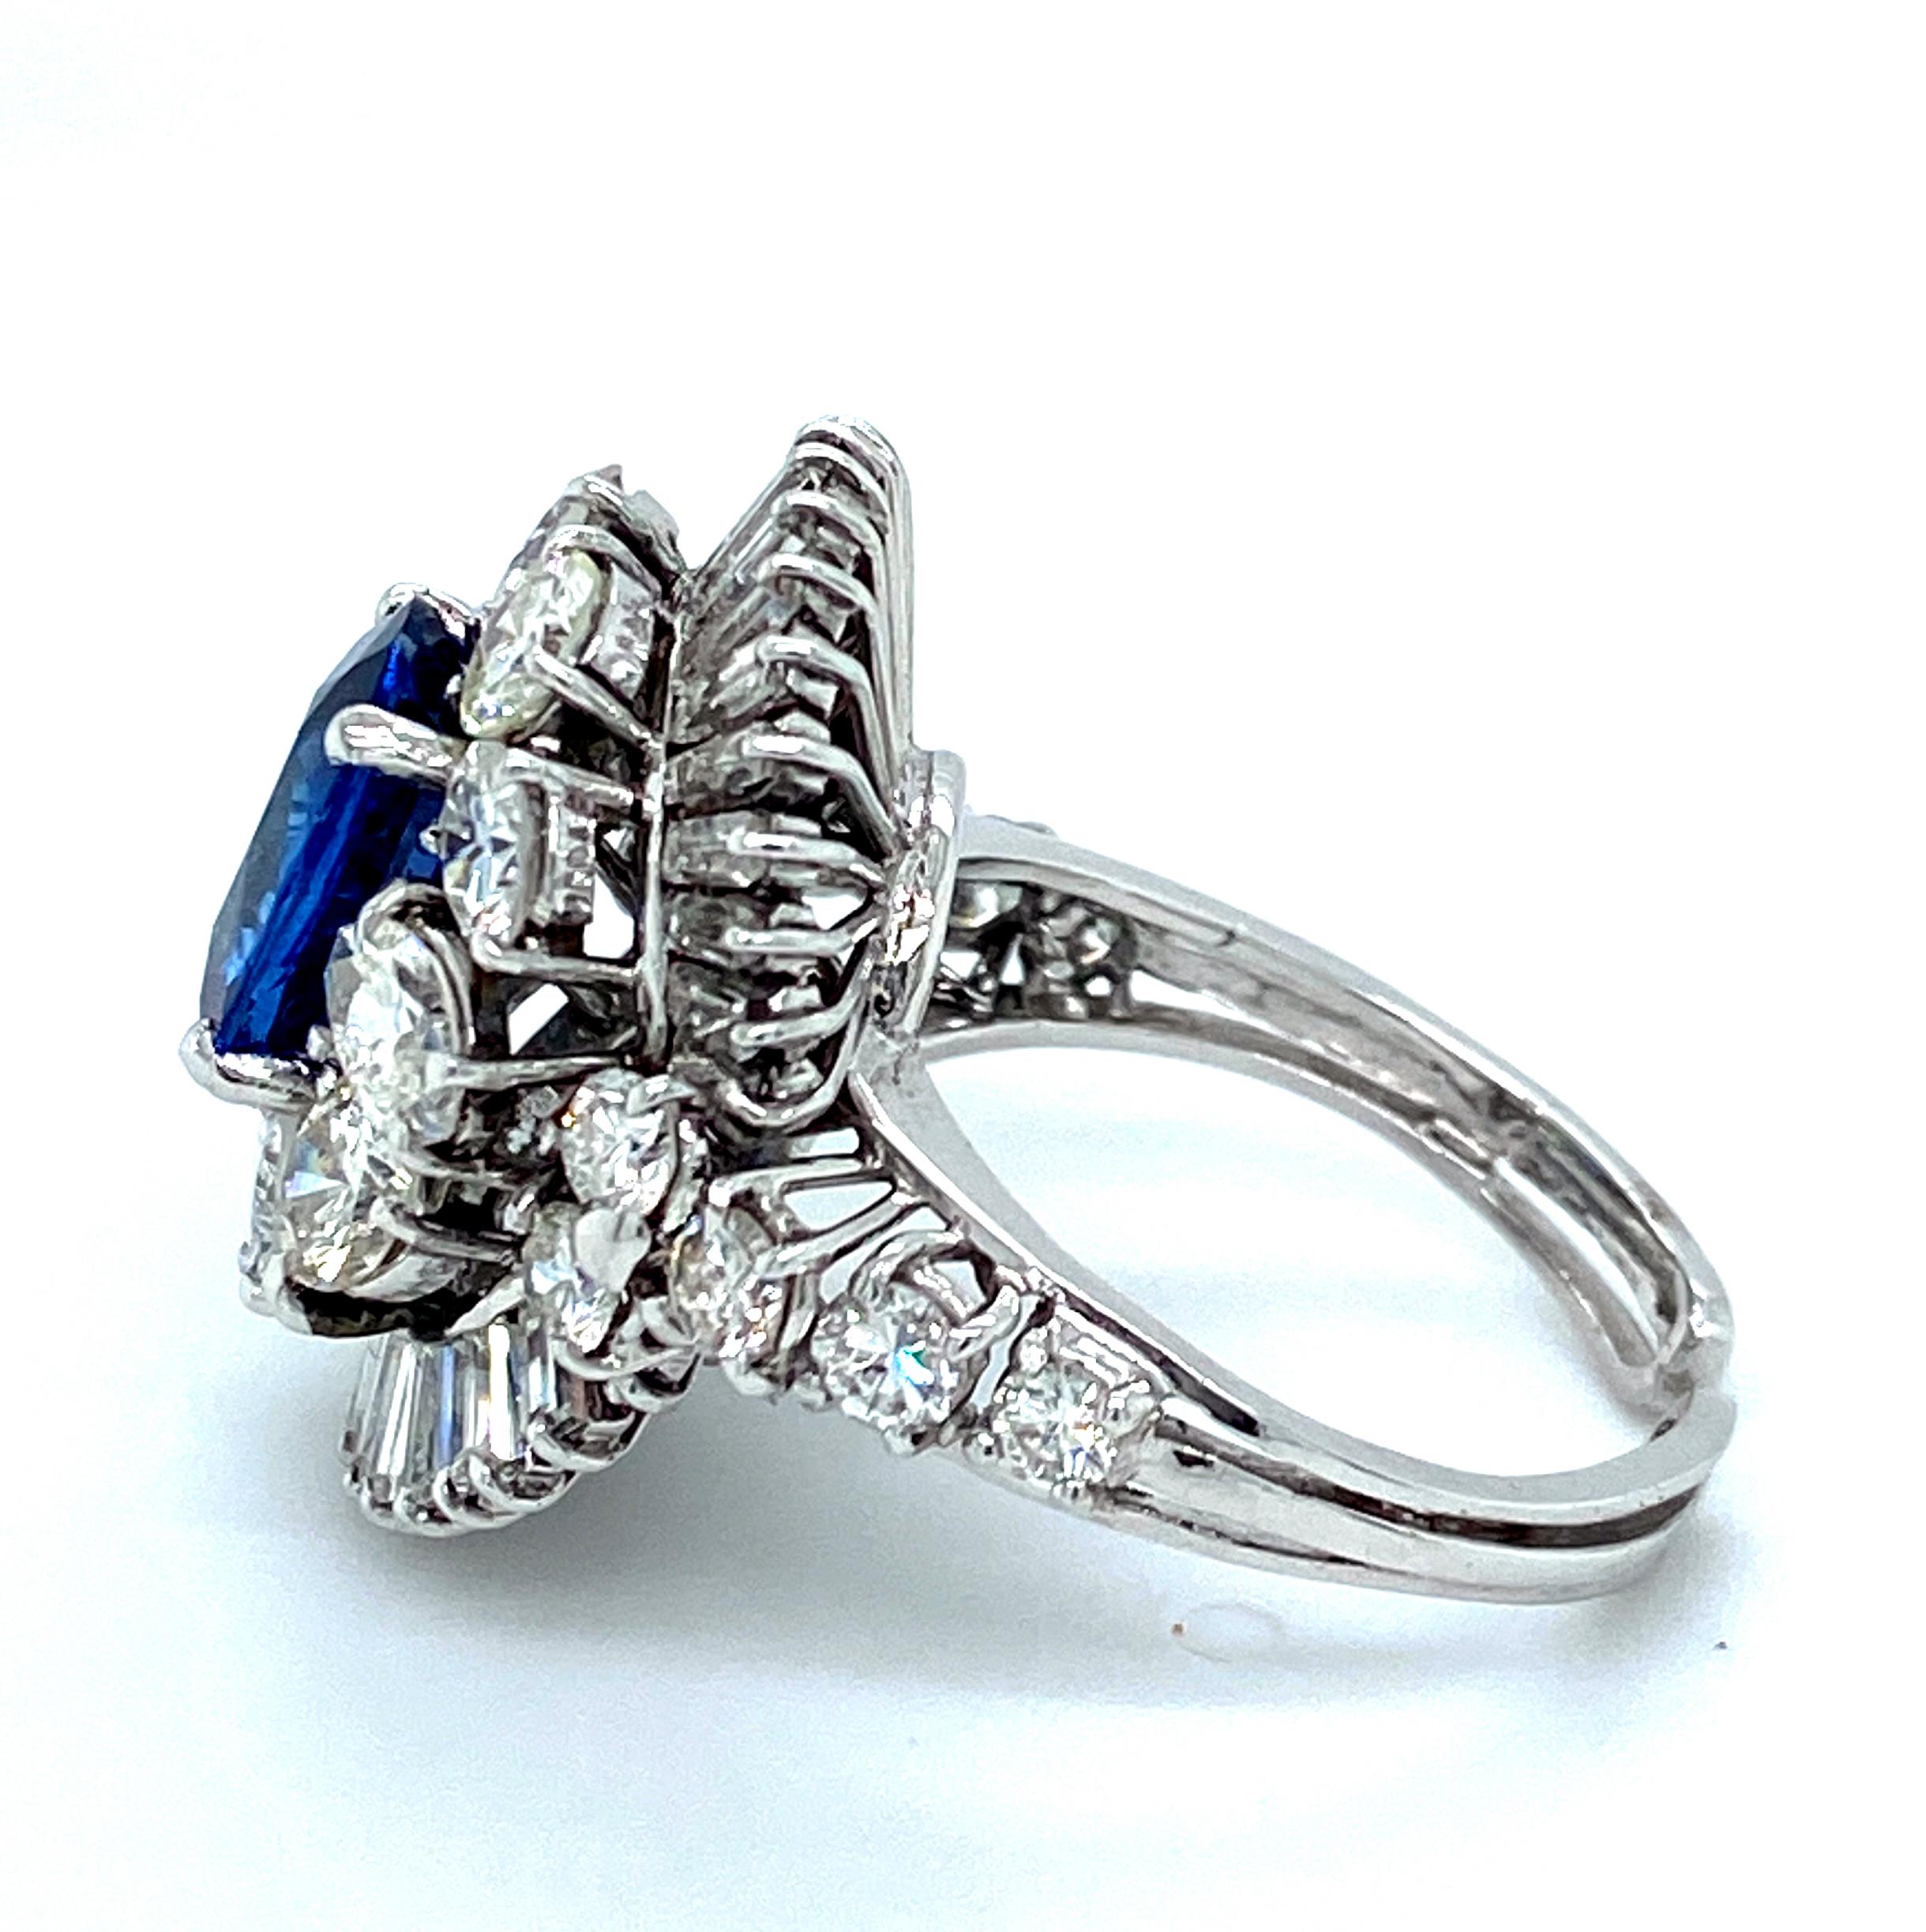 Baguette Cut Stunning Platinum Ring Set with Sapphire 2.48 Carat and 5.60 Carat Diamonds For Sale